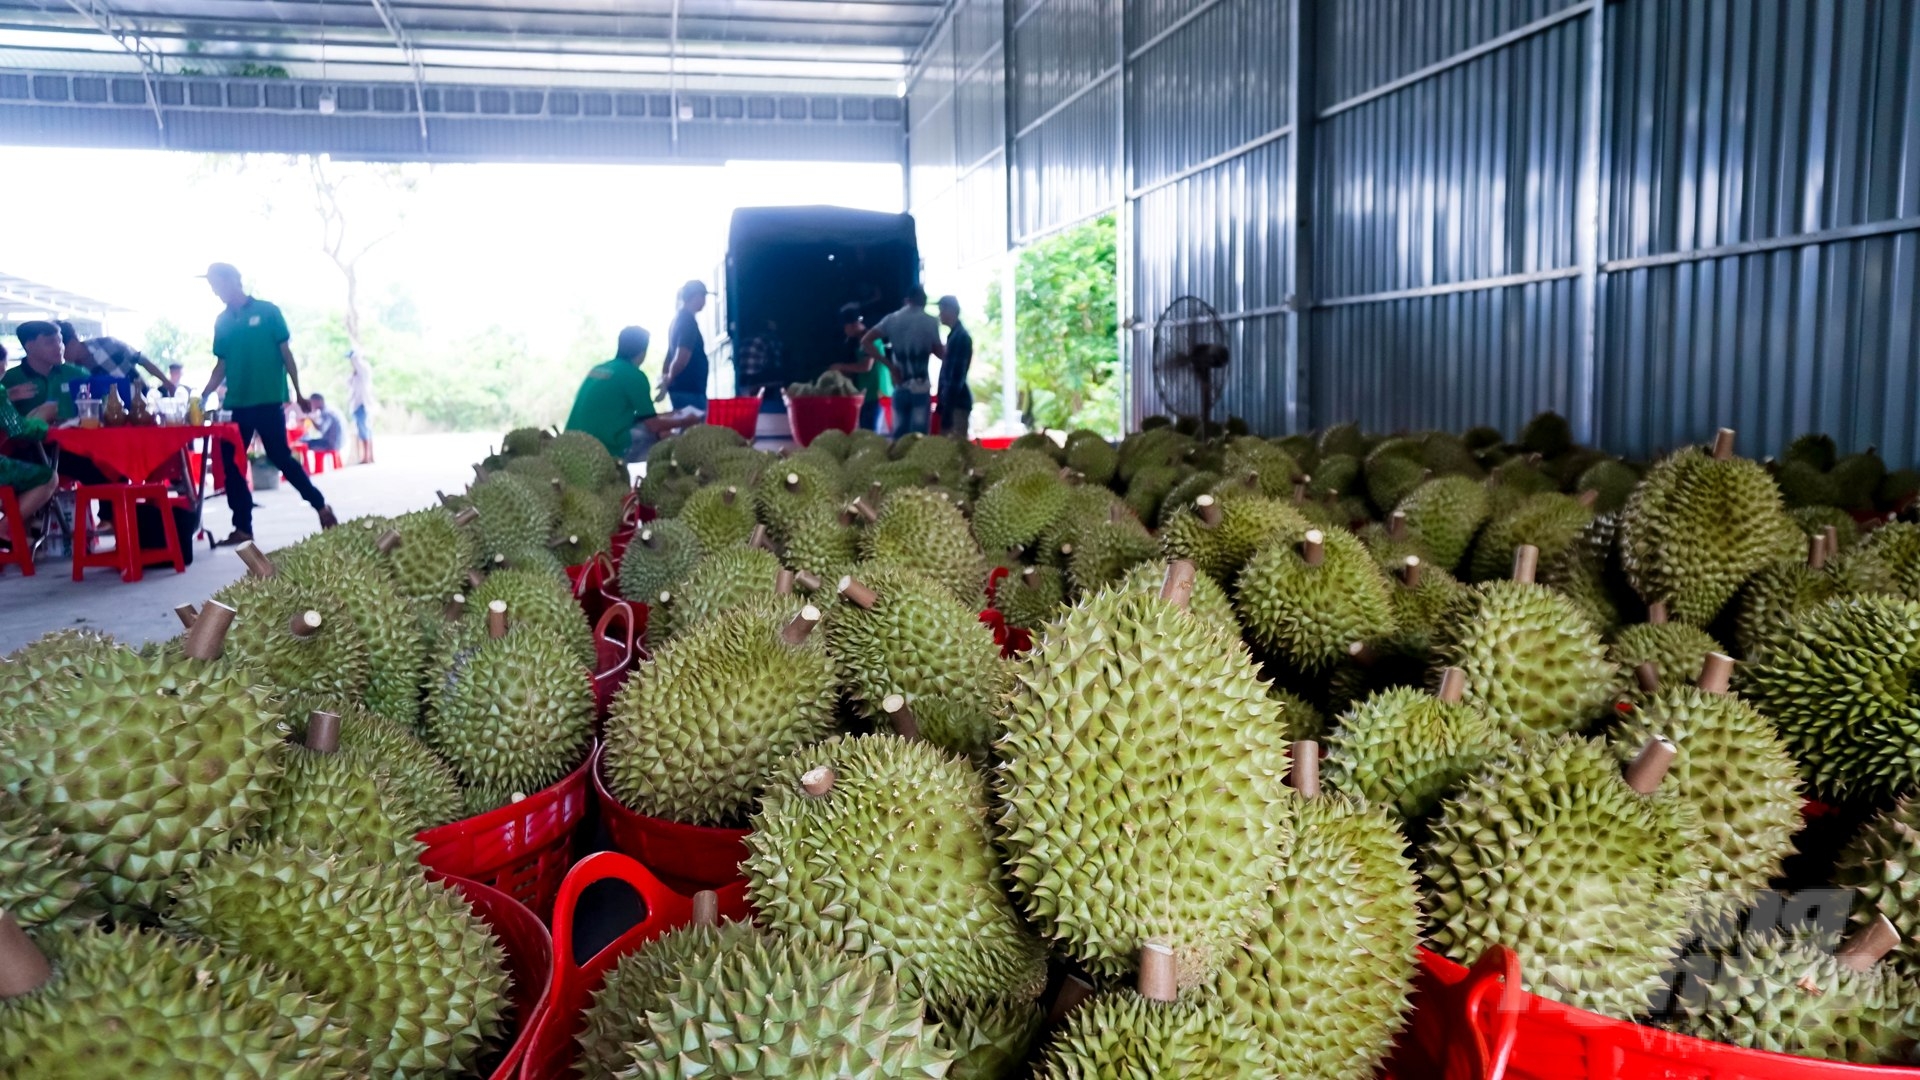 The first batch of durians from Bau Don Fruit Cooperative was purchased by traders and prepared to be exported to China. Photo: Le Binh.